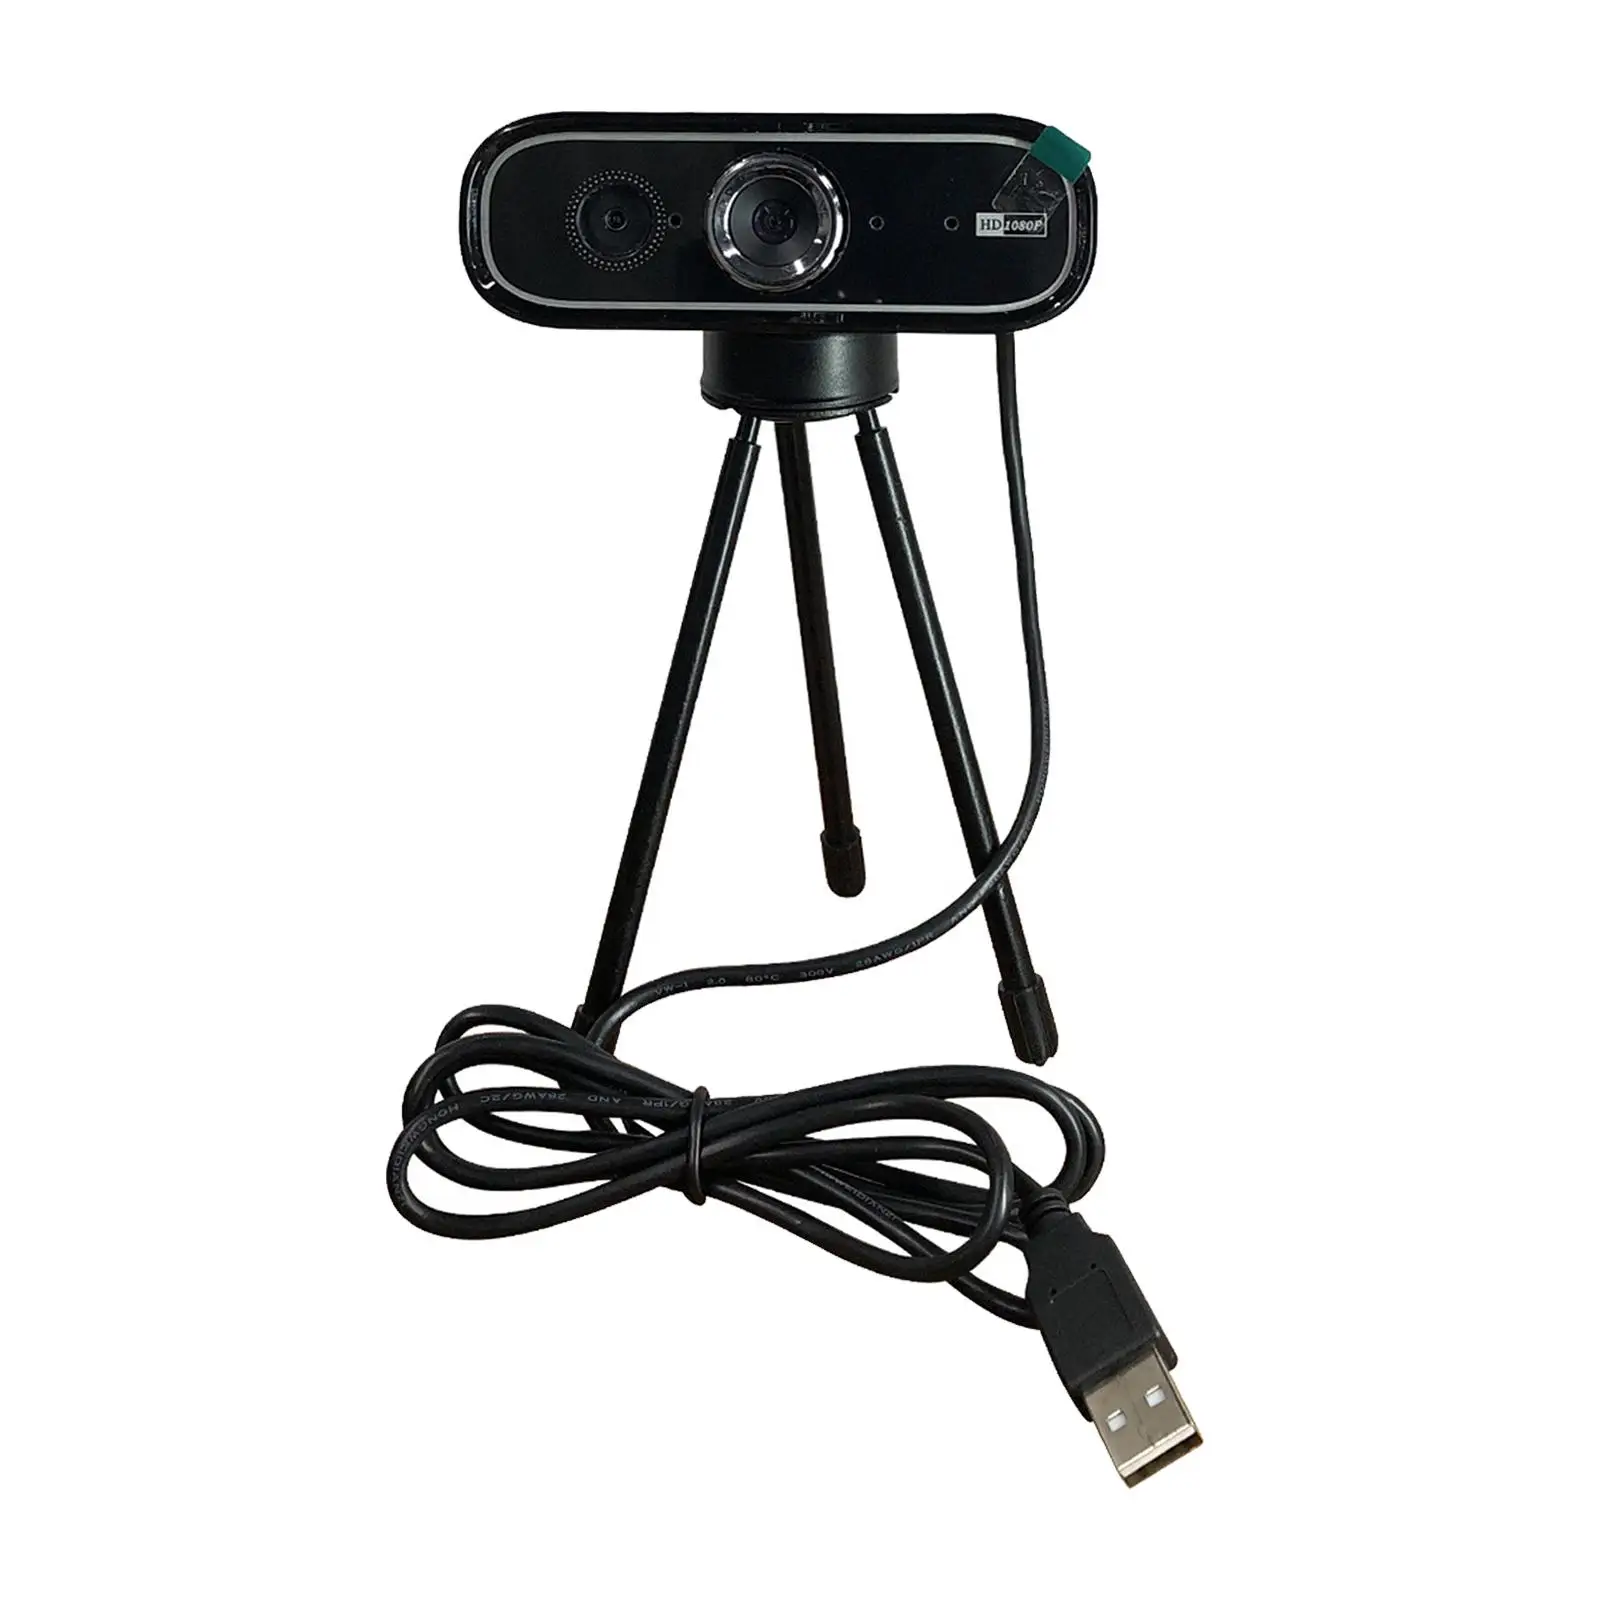 1080P Full USB web camera Cameras Multifunctional Portable Baby Monitor for Conference Meeting Video Call Live stream Desktop